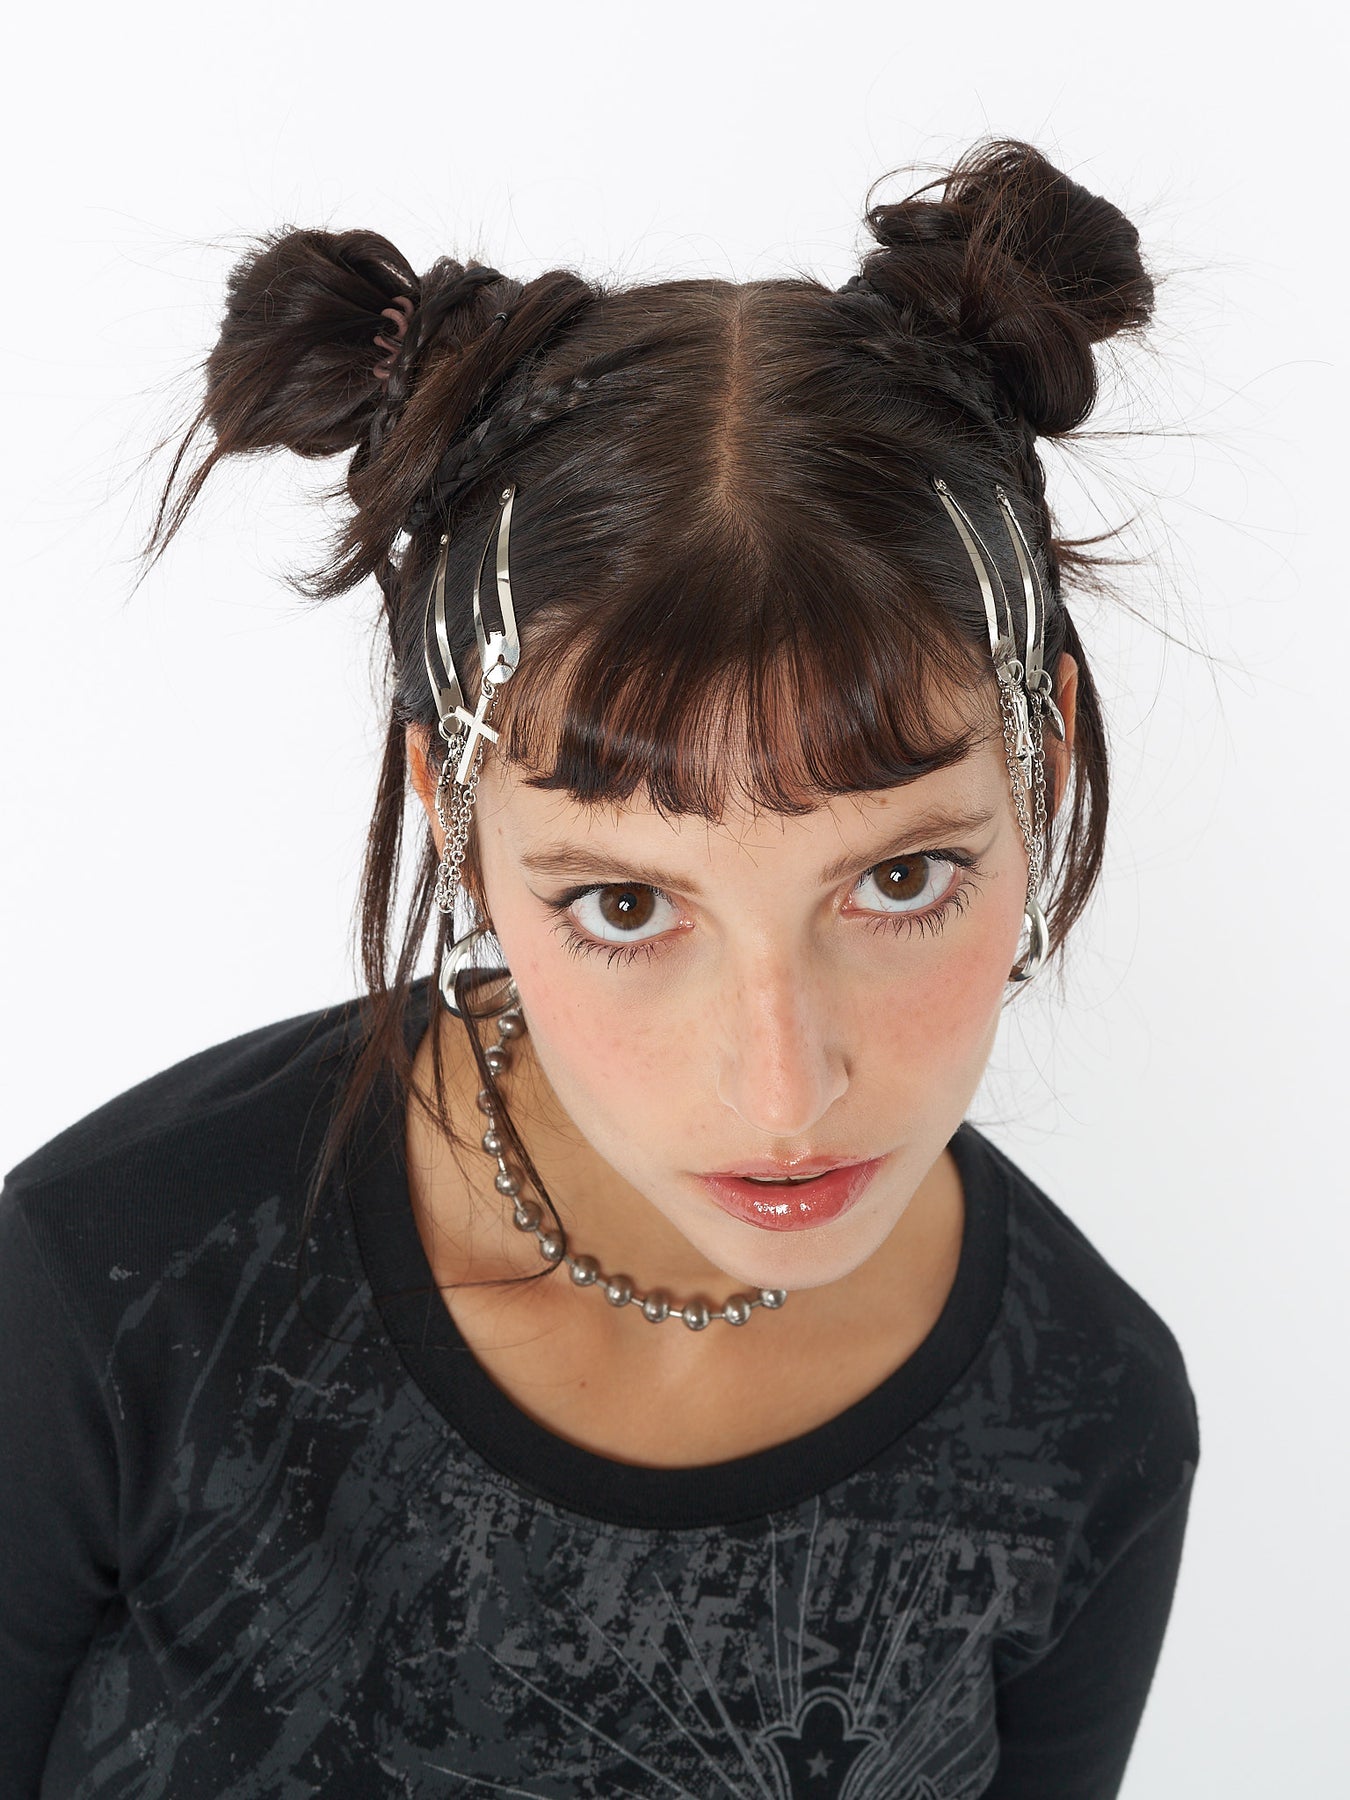 Mia Hair Stickers, Small Clip-less Hair Ornaments, Hair Accessories, Hair  Barrettes, Skulls + Crossbones, Black Sparkly Silver, for Bangs, Updos